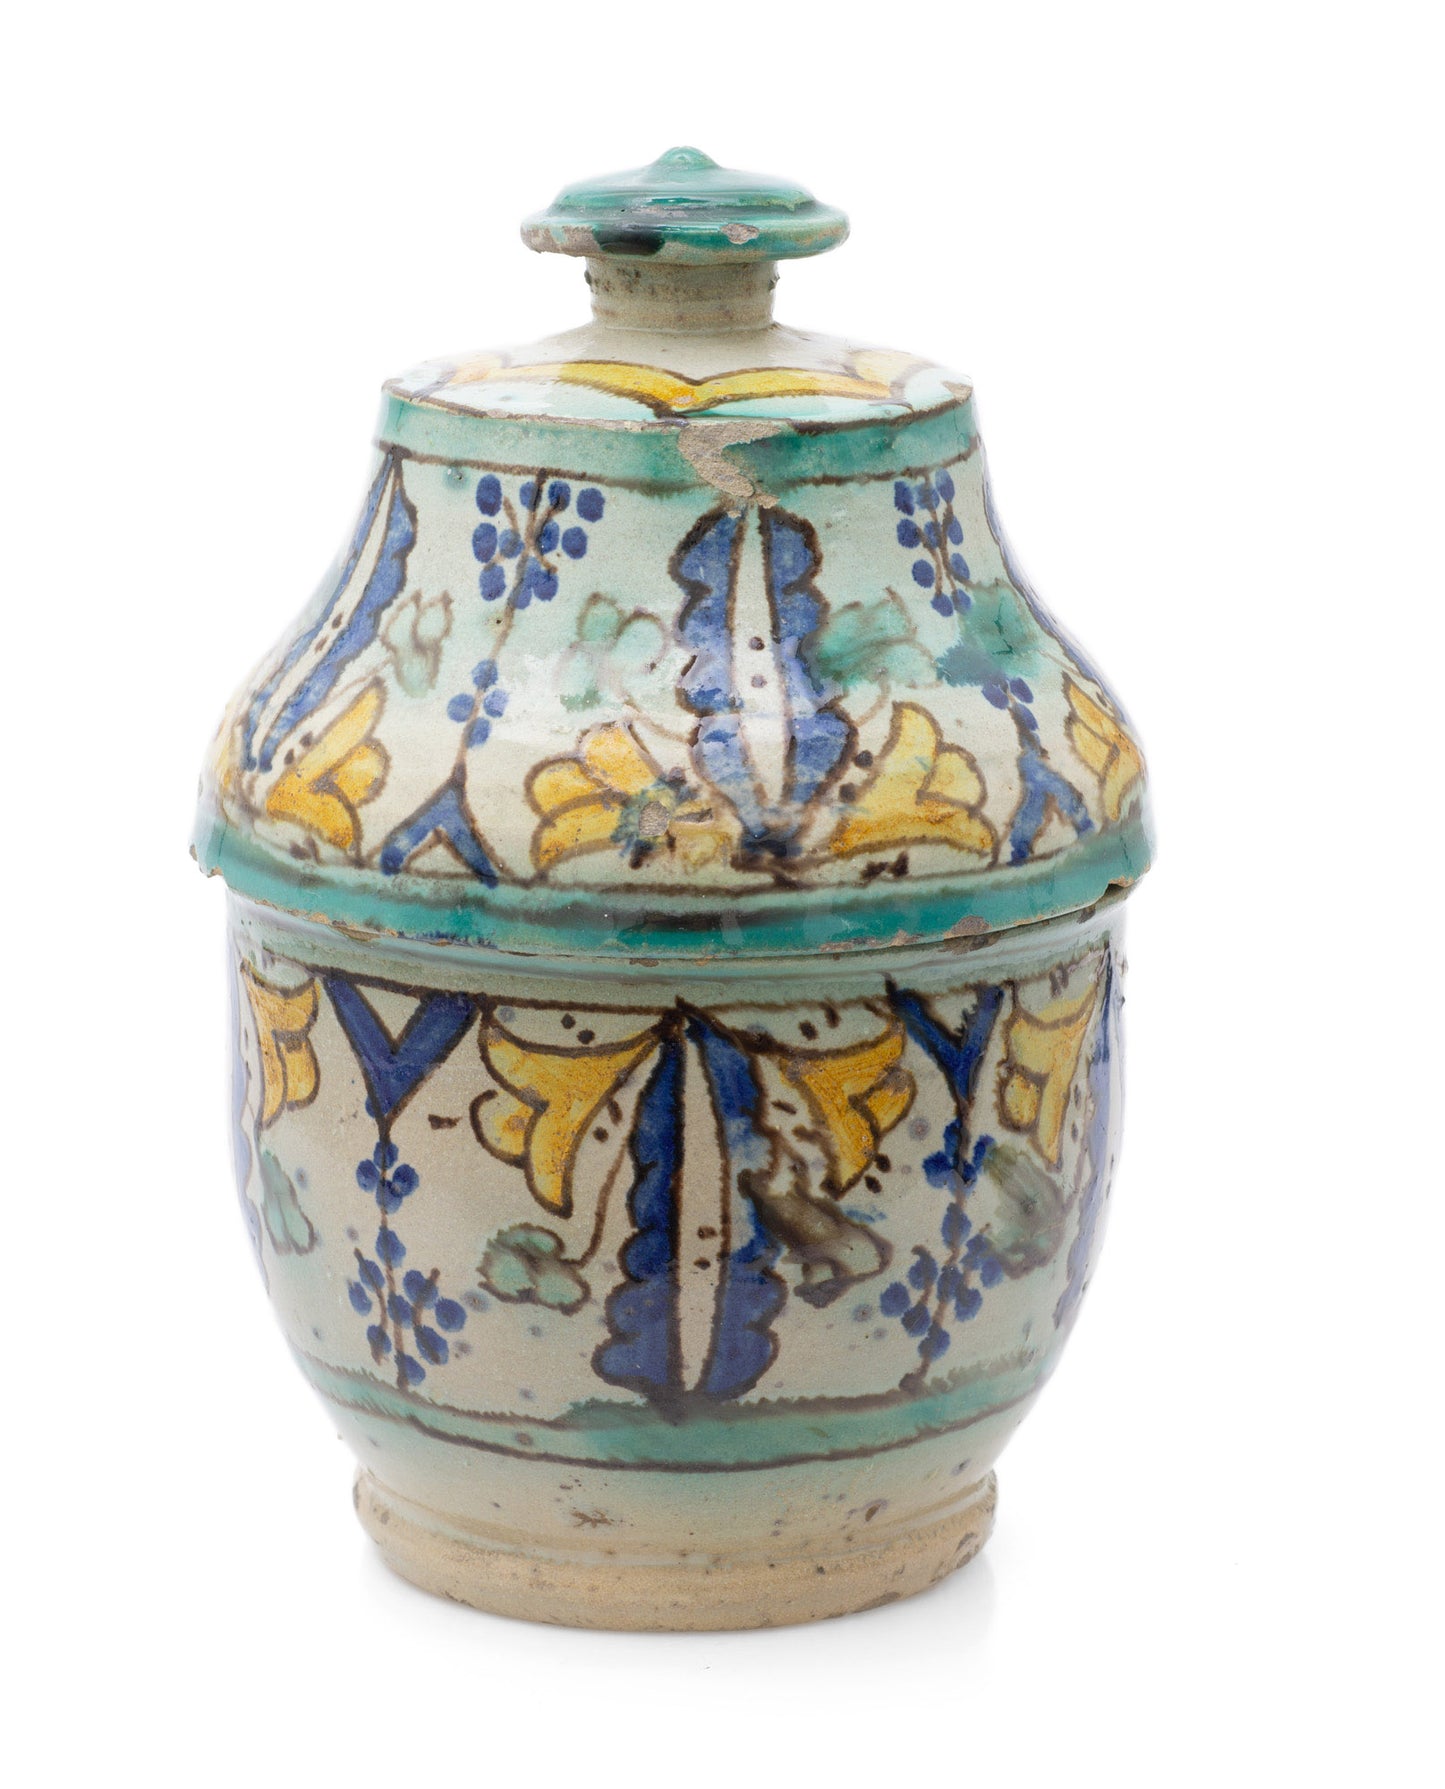 Antique Colonial Indian Multan / Sindh Pottery Storage Jar in Polychrome Glaze (Code 2516)